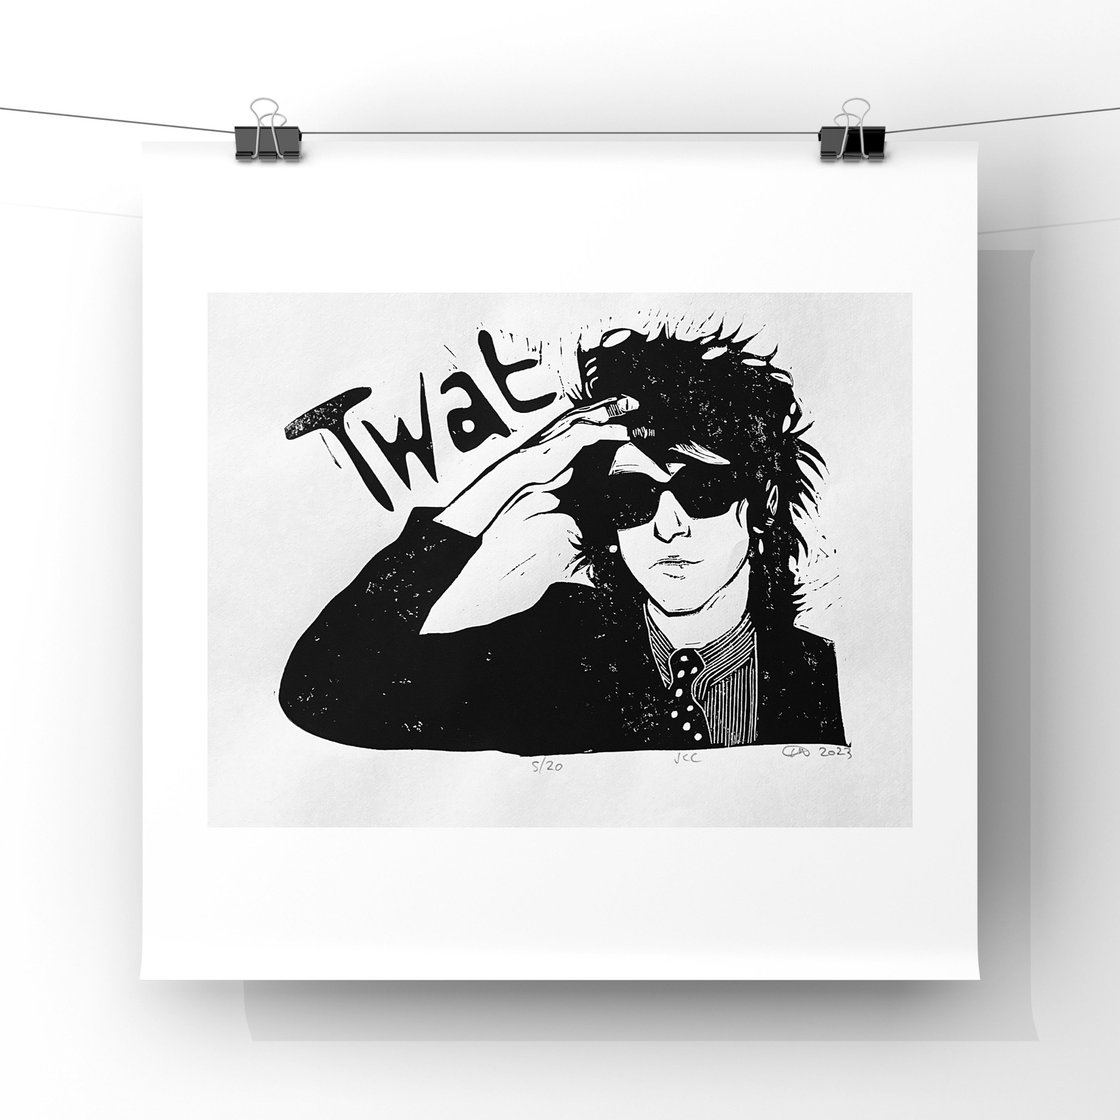 Image of John Cooper Clarke. T**t. Hand Made. Original A3 linocut print. Limited and Signed. Art.